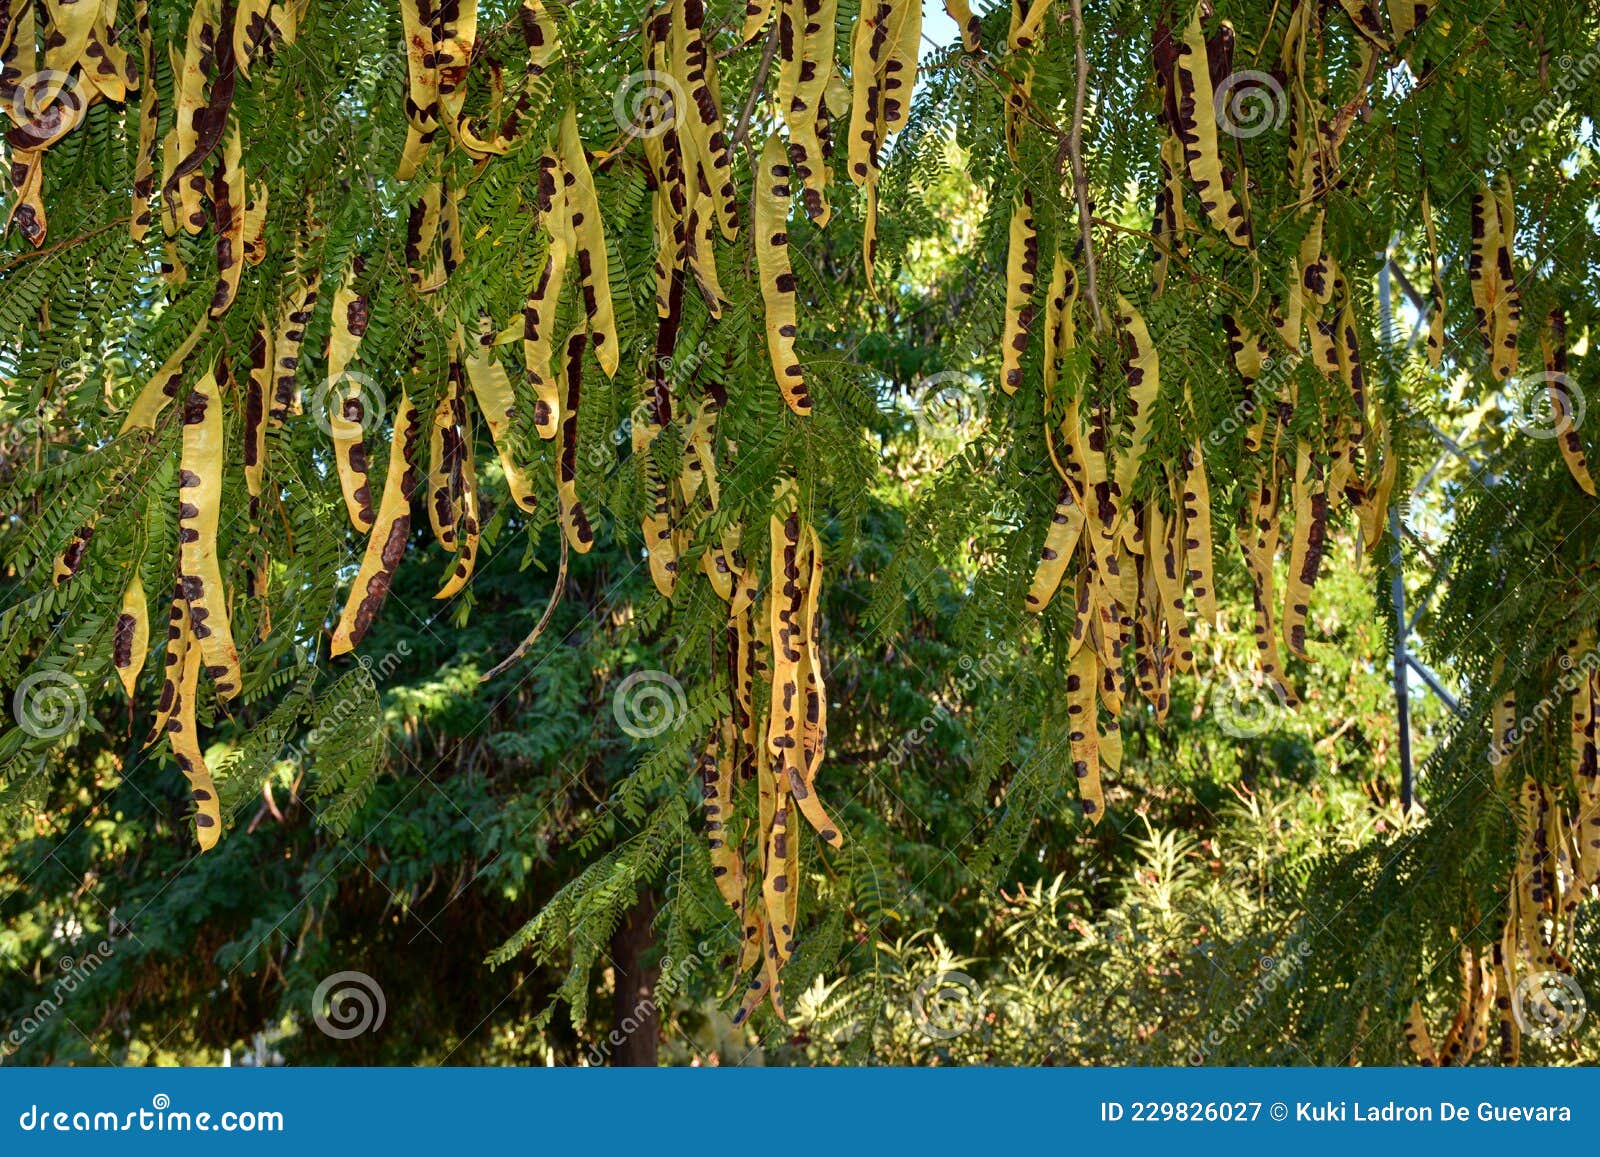 fruits on the branches of a three-spined acacia